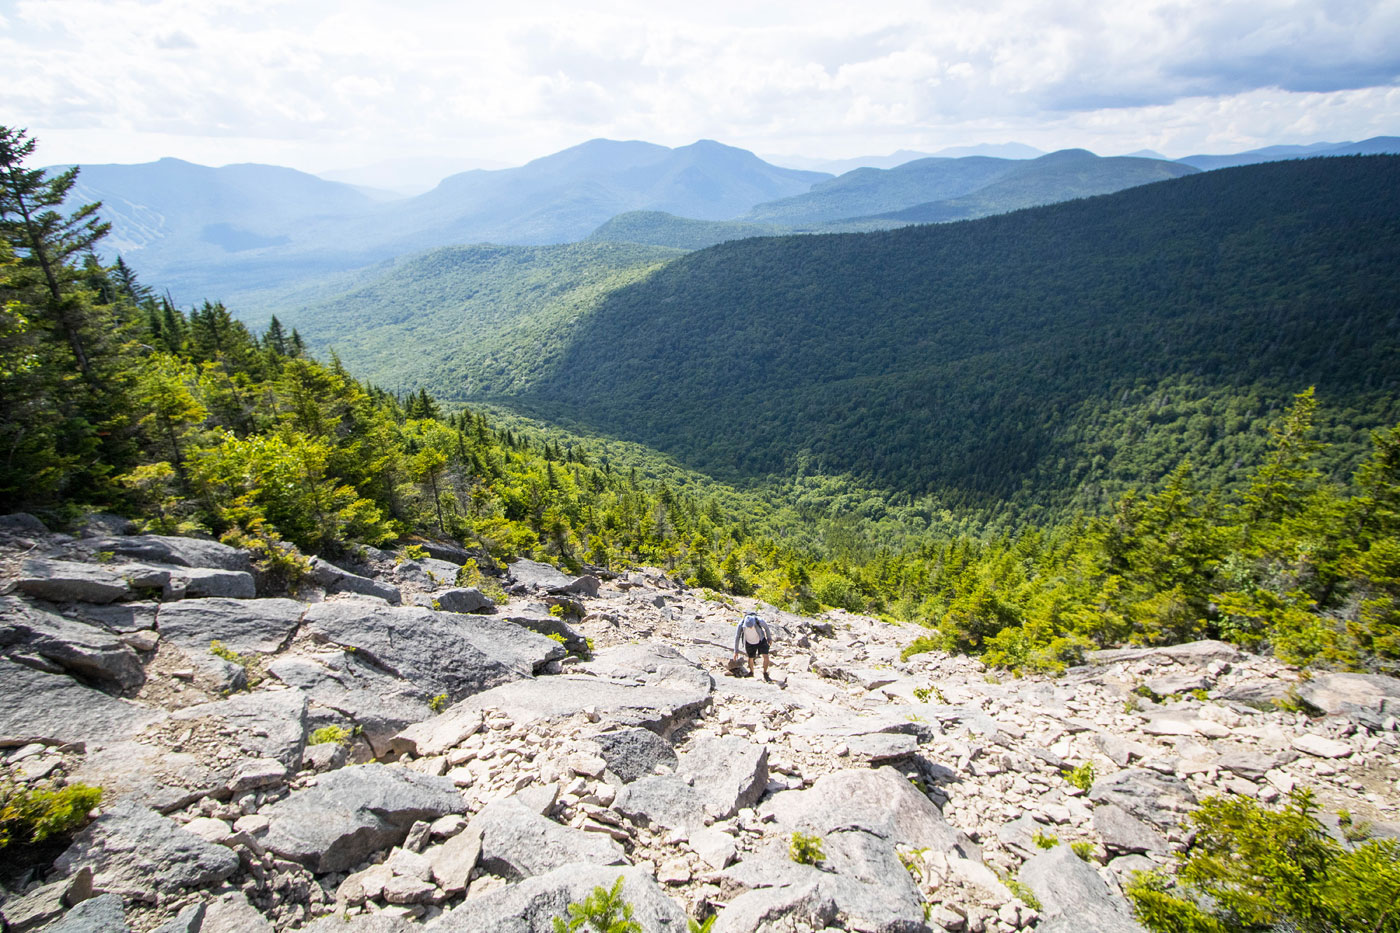 Hike Mount Tripyramid Loop via North Slide in White Mountain National Forest, New Hampshire - Stav is Lost